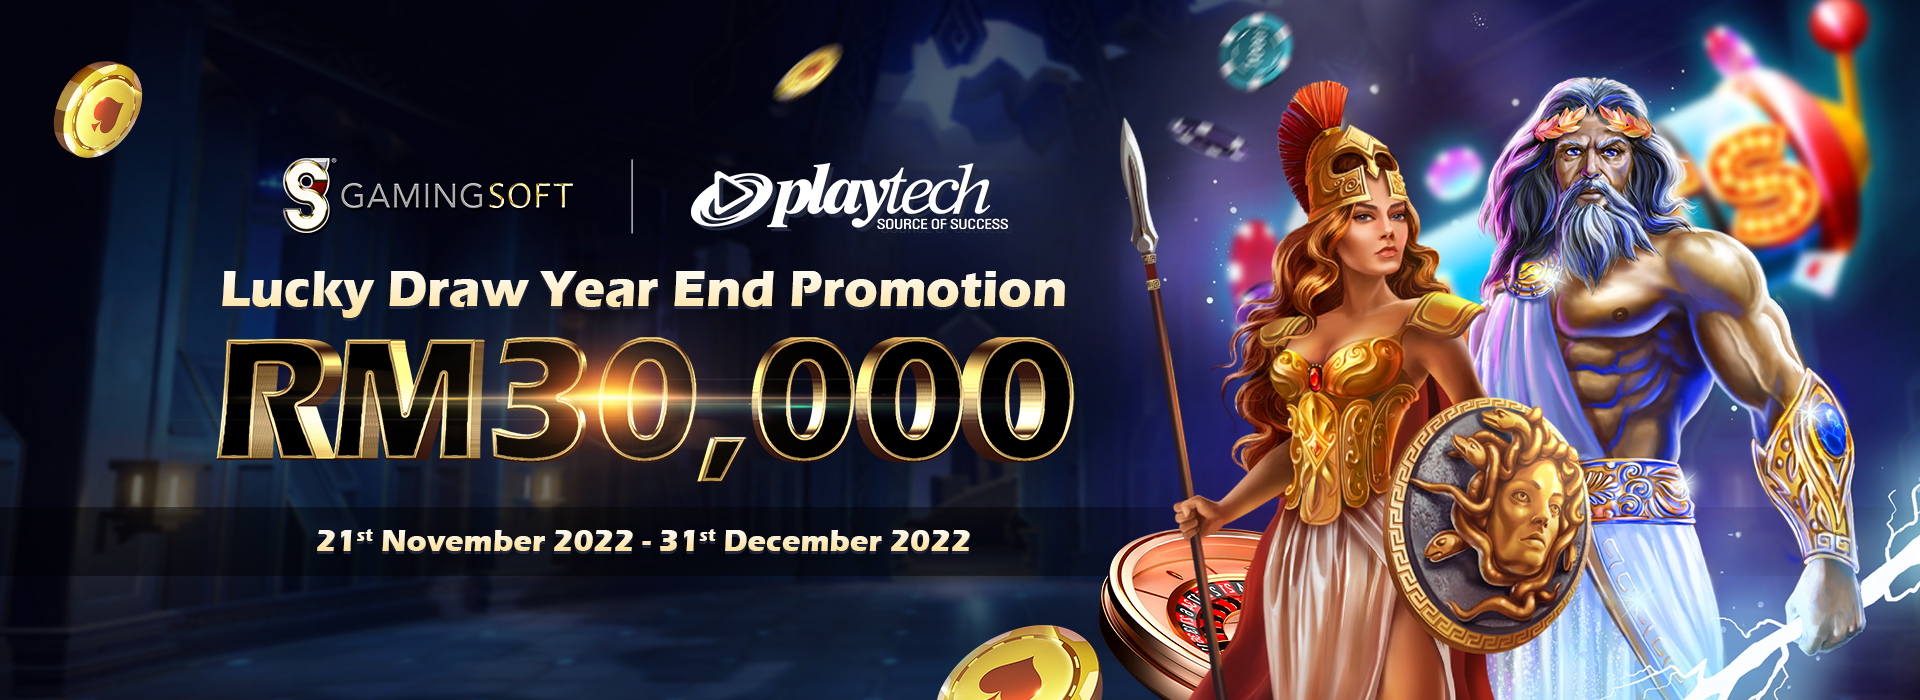 Gamingsoft Playtech Year end Lucky Draw Web Banner - GamingSoft